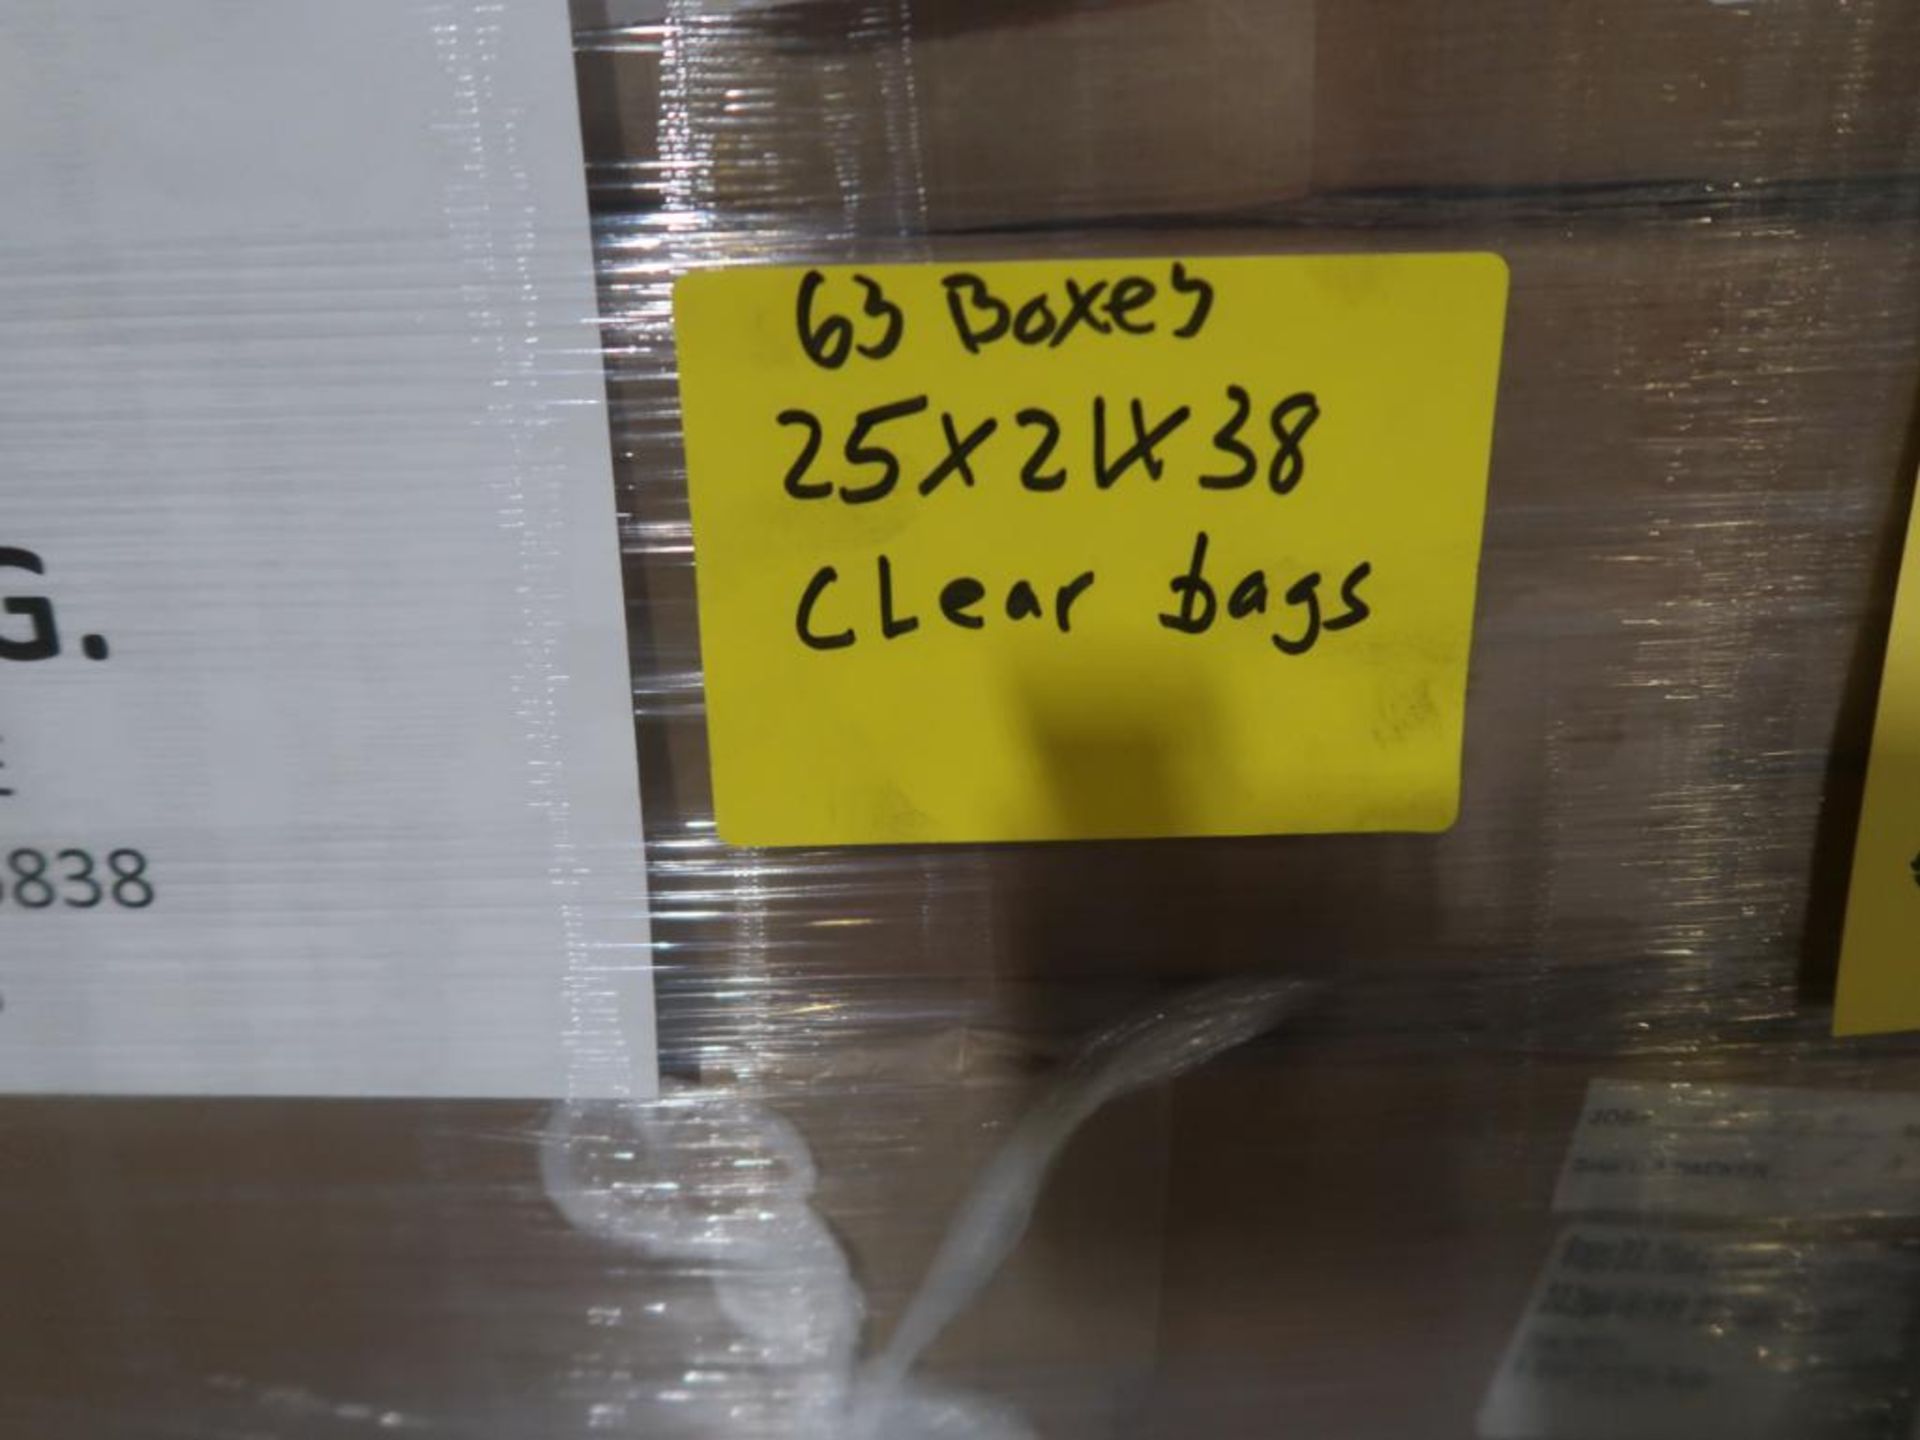 LOT: (63) Boxes of Clear Bags 25" x 21" x 38" on (1) Pallet (LOCATION: 4600 BELOIT DR., - Image 2 of 2